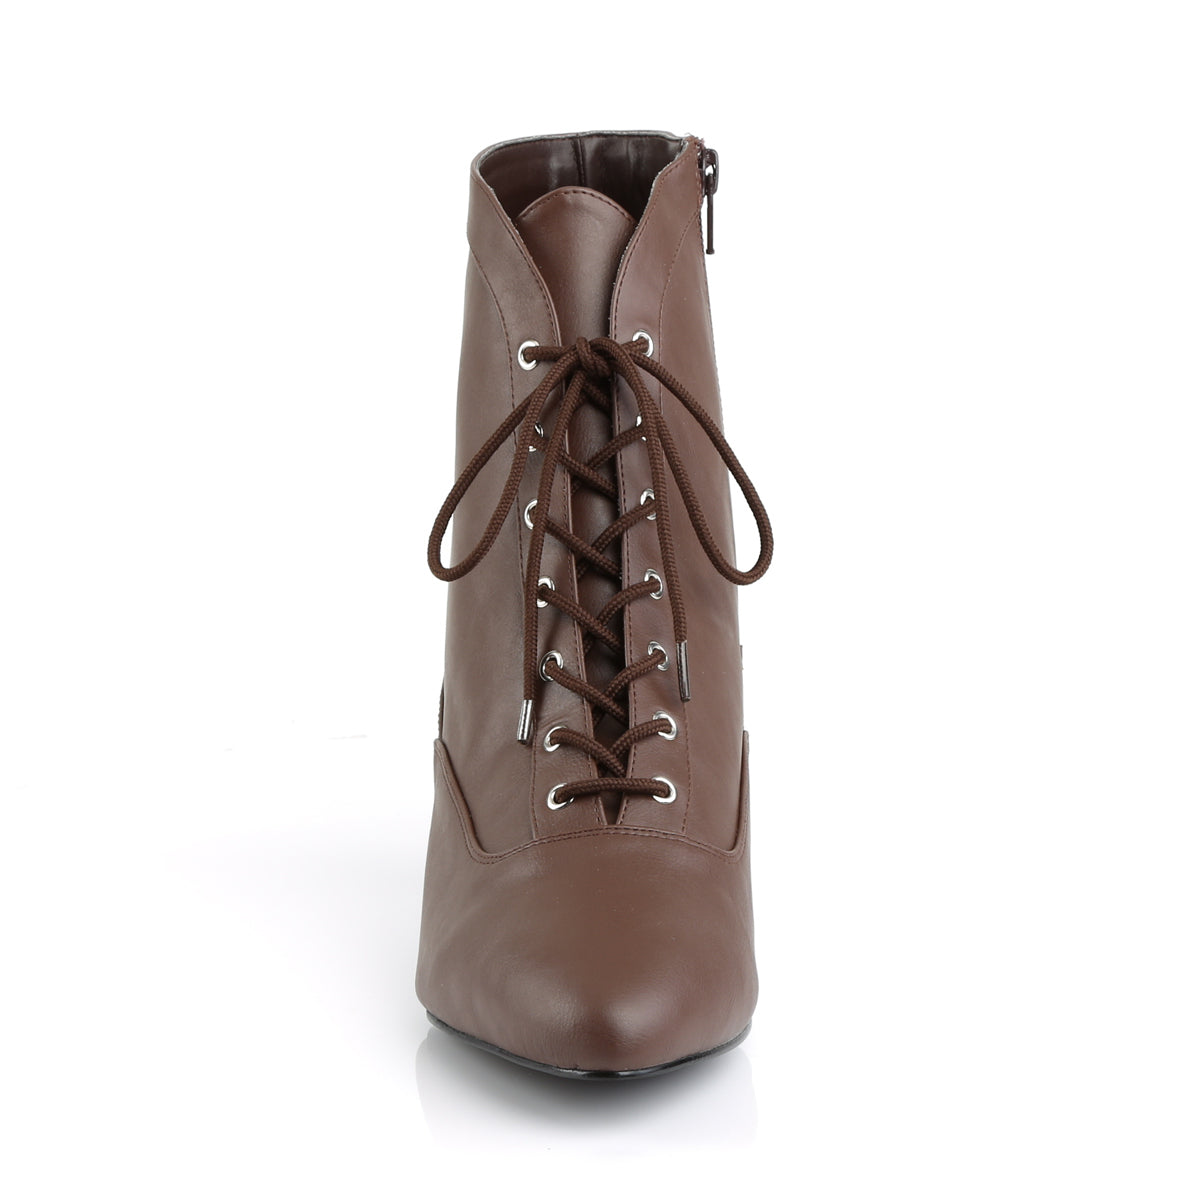 Large Size Victorian Boots Brown